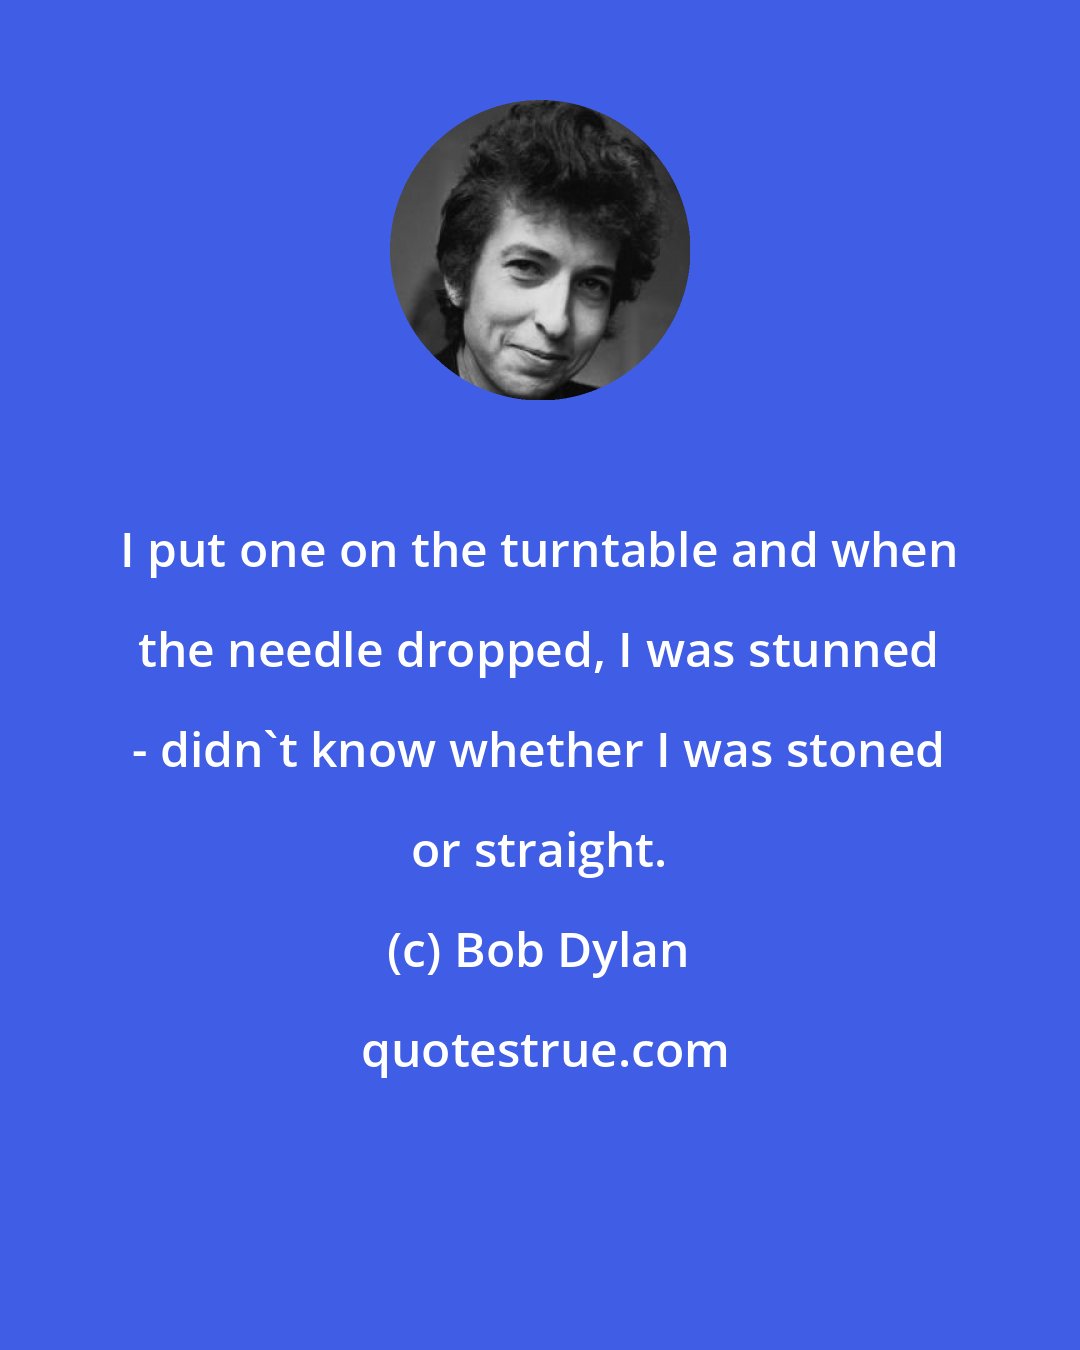 Bob Dylan: I put one on the turntable and when the needle dropped, I was stunned - didn't know whether I was stoned or straight.